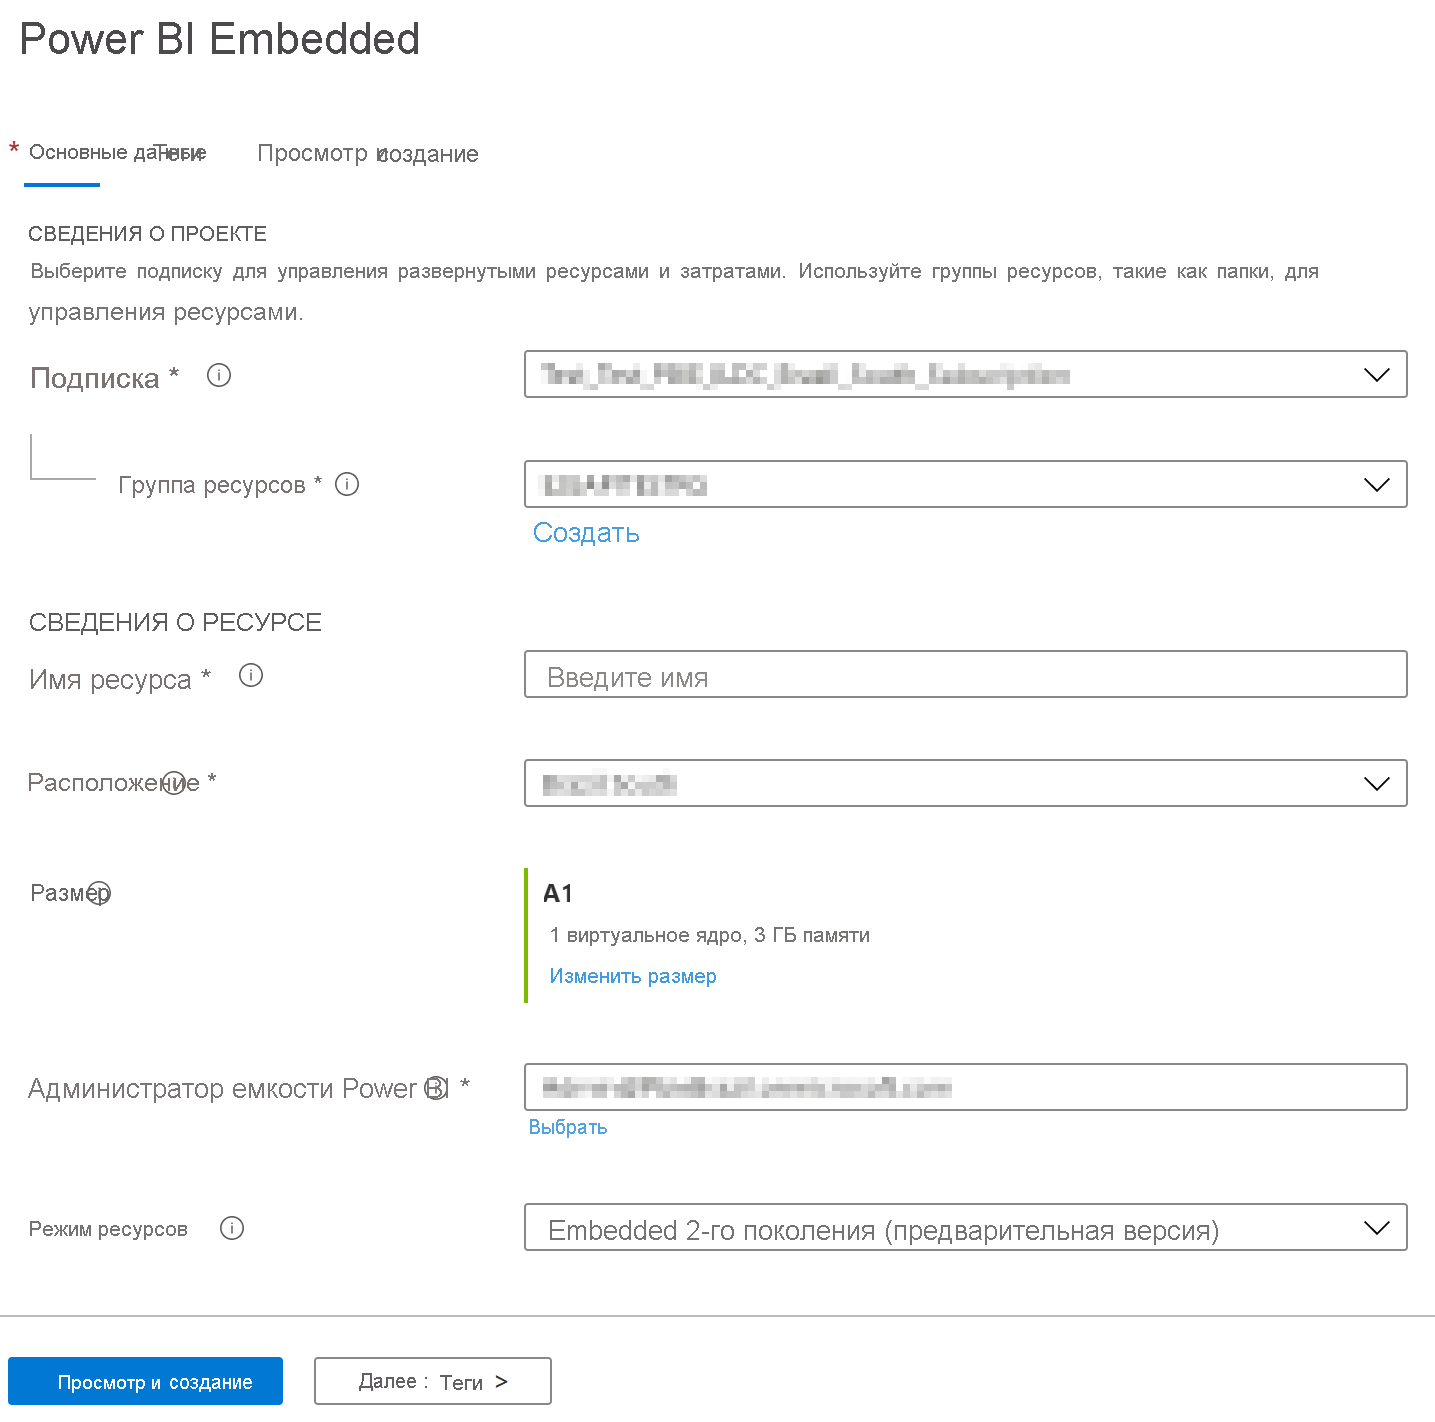 Screenshot shows the Basics tab of the Power B I Embedded page to create new capacity in the Azure portal.